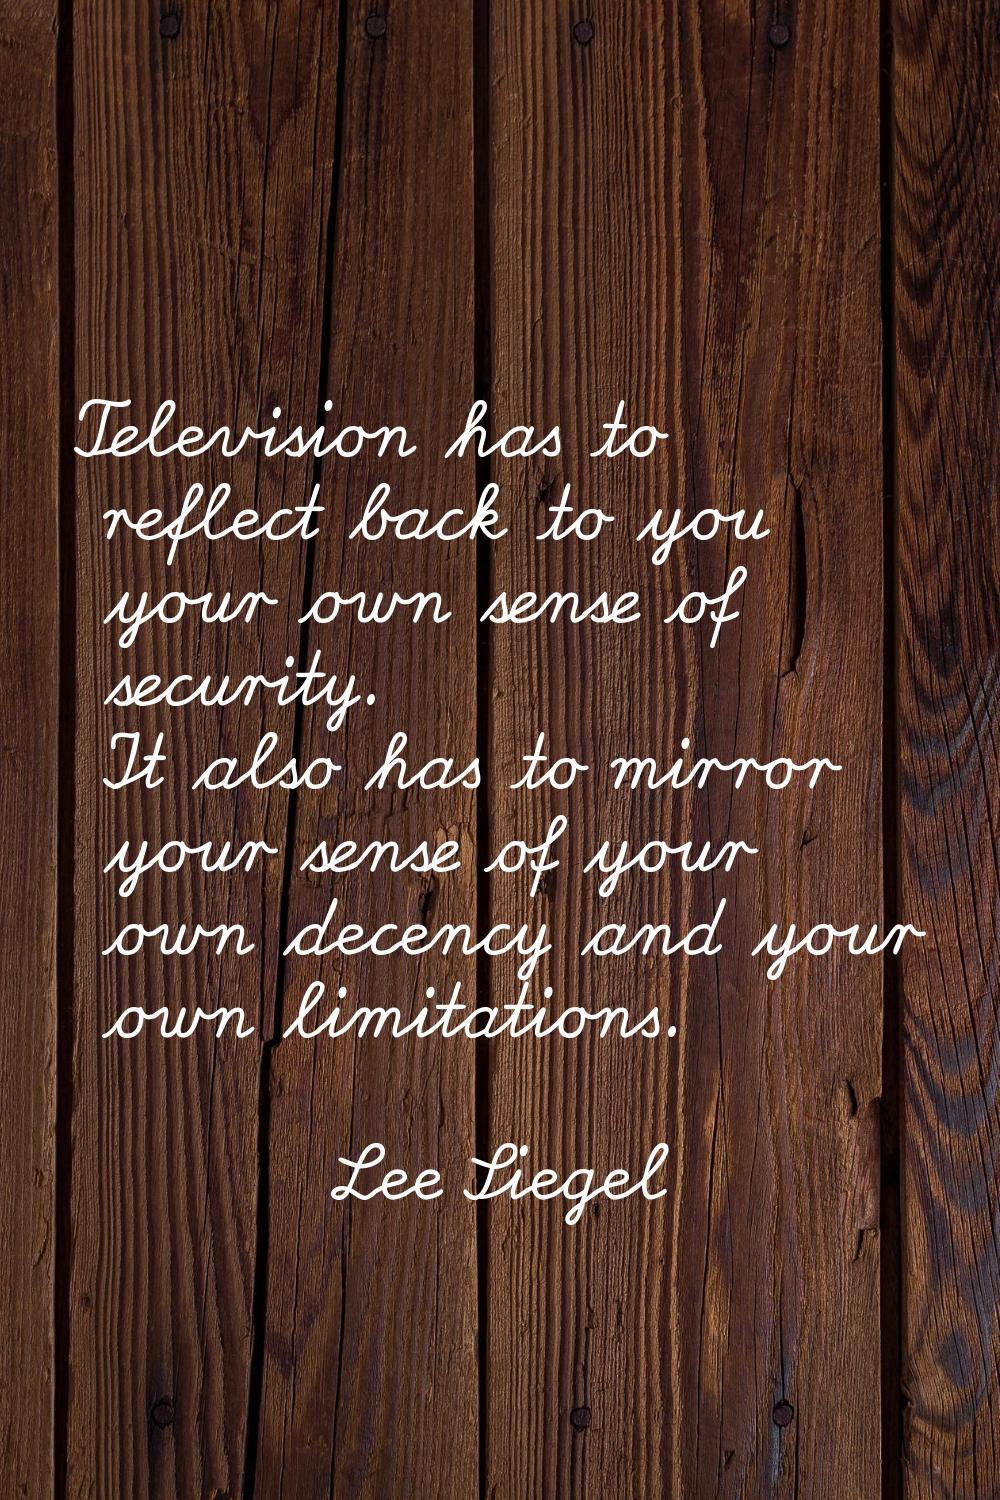 Television has to reflect back to you your own sense of security. It also has to mirror your sense 